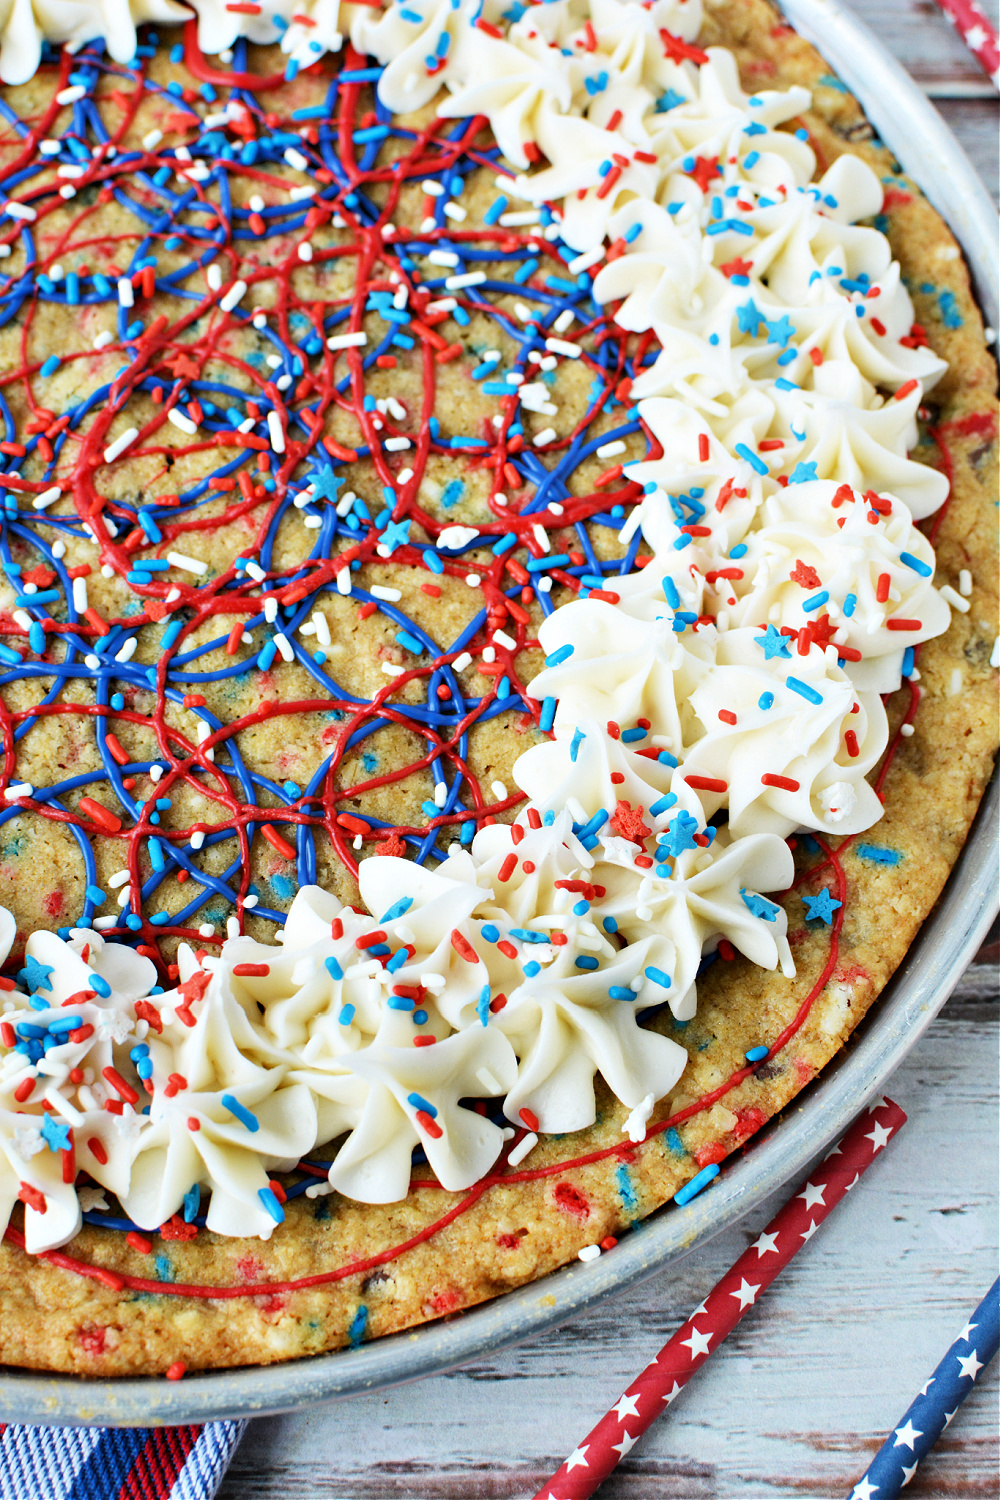 A close-up of the oatmeal chocolate chip cookie pizza decorated with frosting